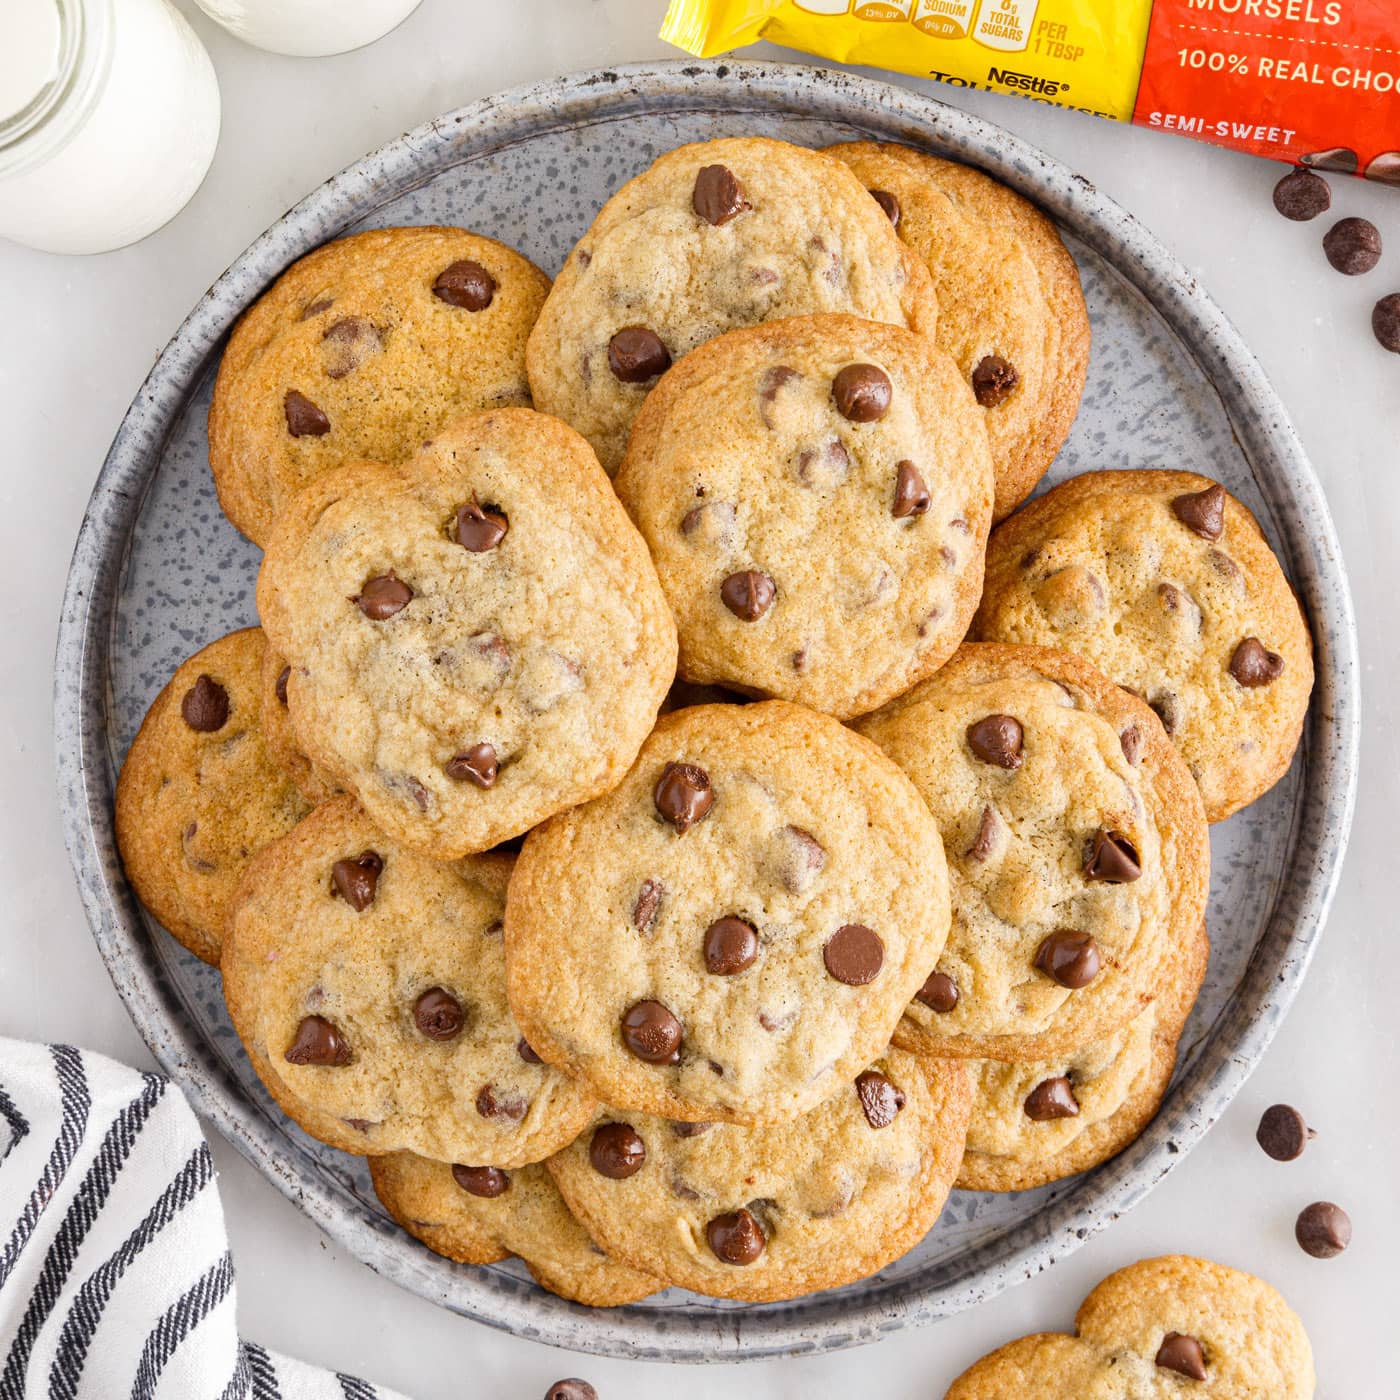 toll-house-chocolate-chip-cookie-recipe-on-bag-deporecipe-co